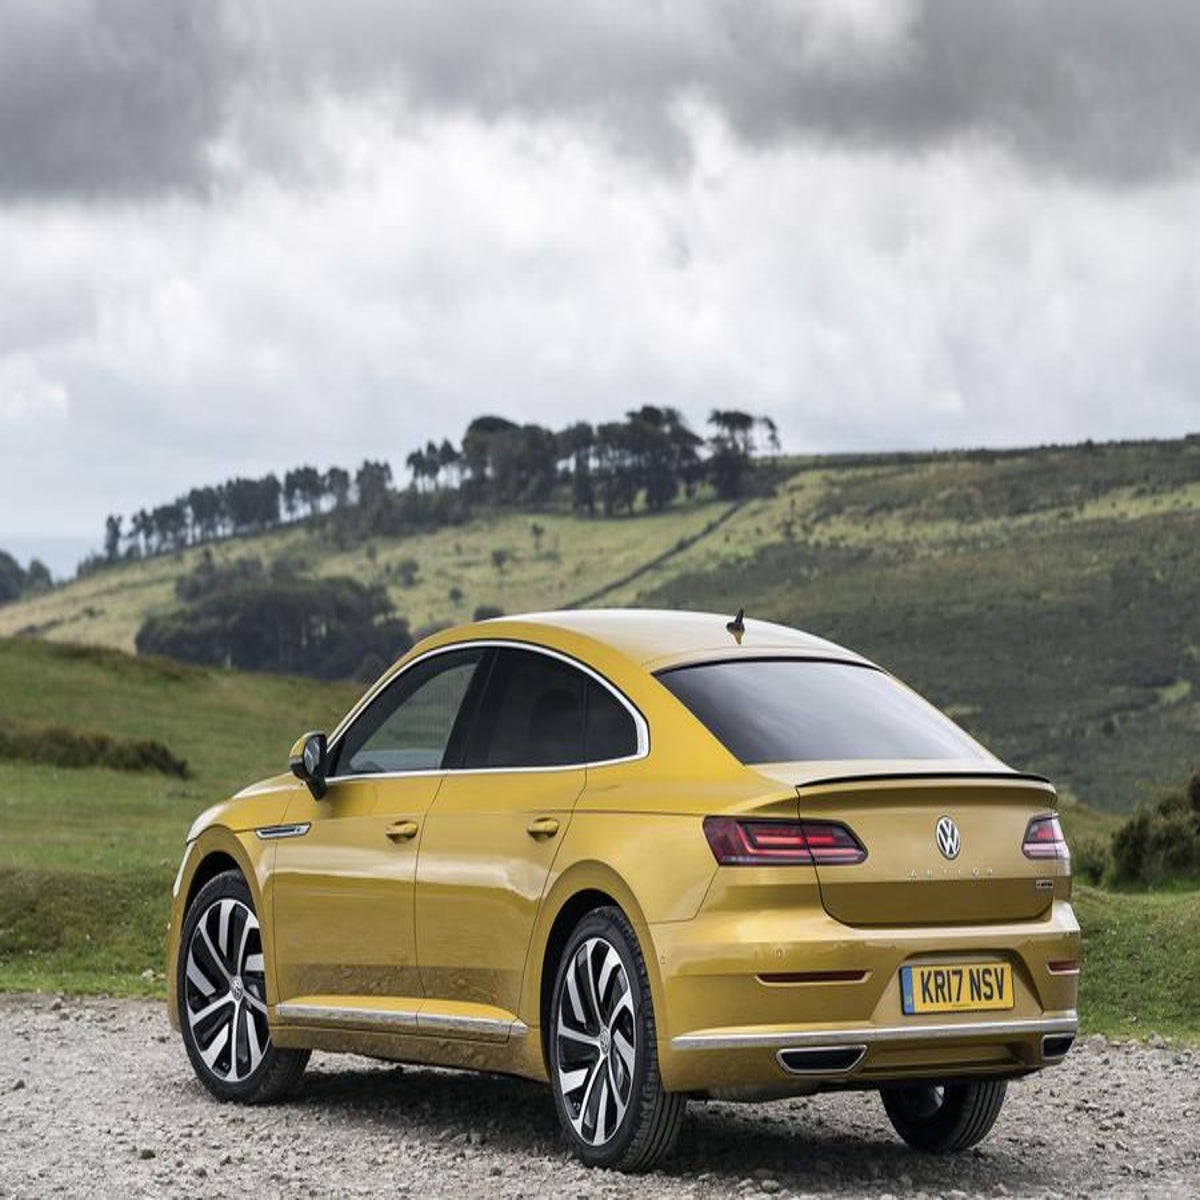 Review: VW Arteon 2.0 TDI 150PS, The Independent